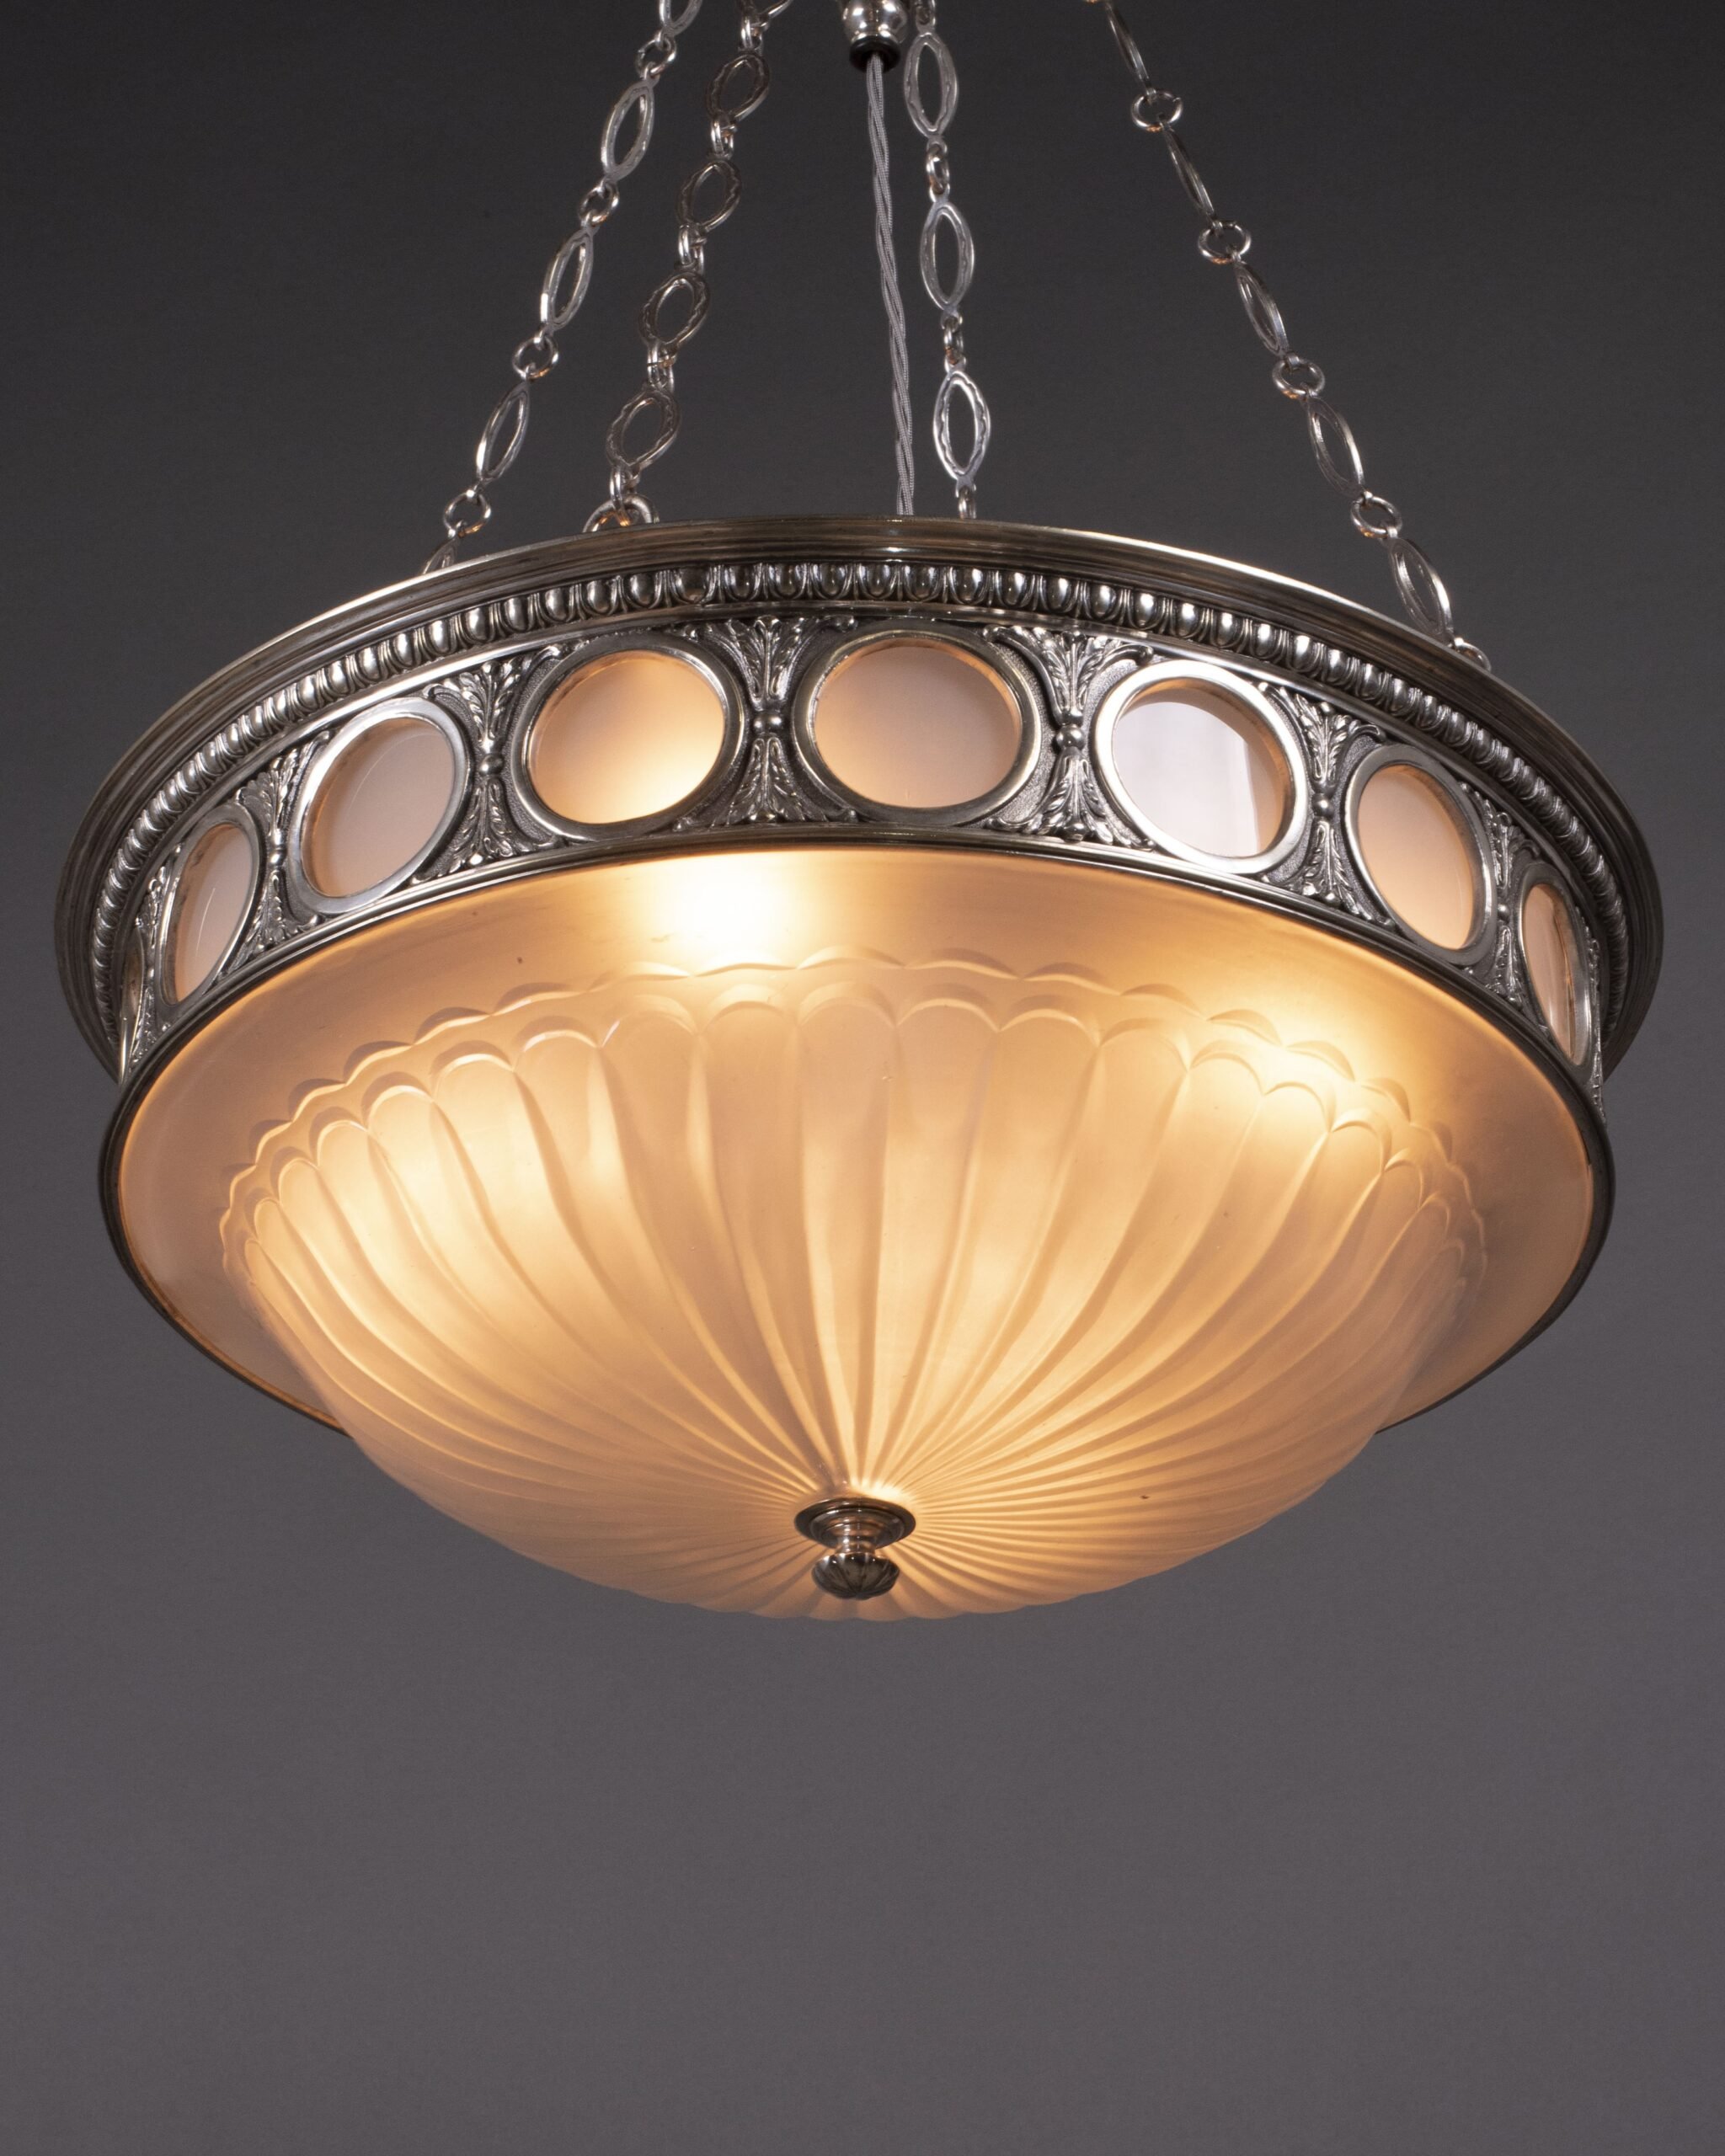 F&C Osler Antique Ceiling Light with Satin Glass Bowl 5